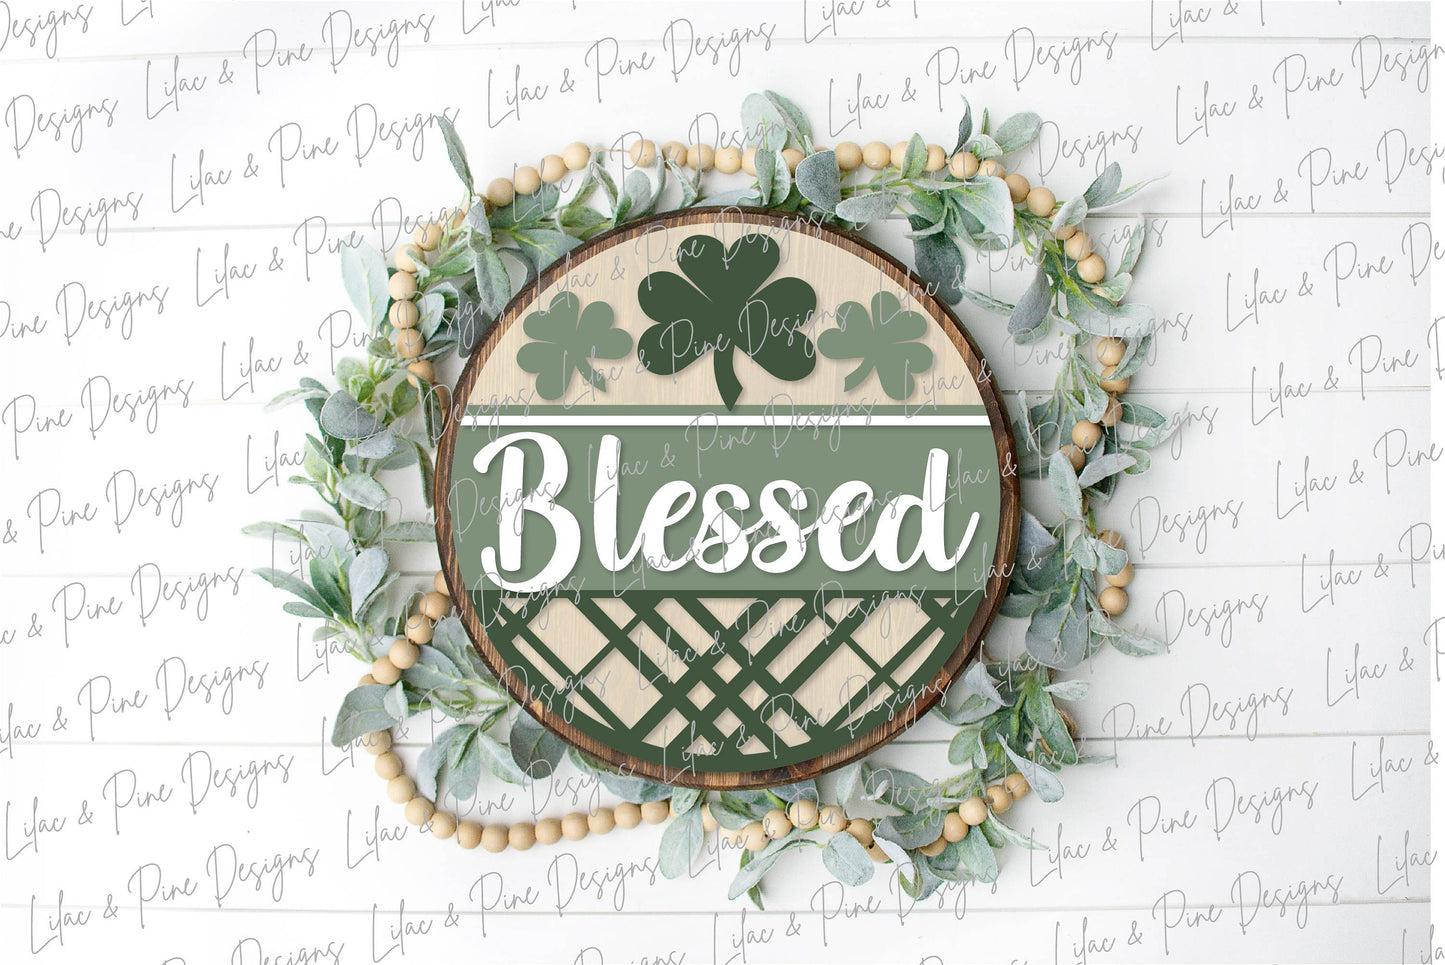 Lucky St Patrick Welcome door hanger SVG, personalized welcome SVG, Blessed St Paddy welcome sign, shamrock SVG, Glowforge file, laser svg